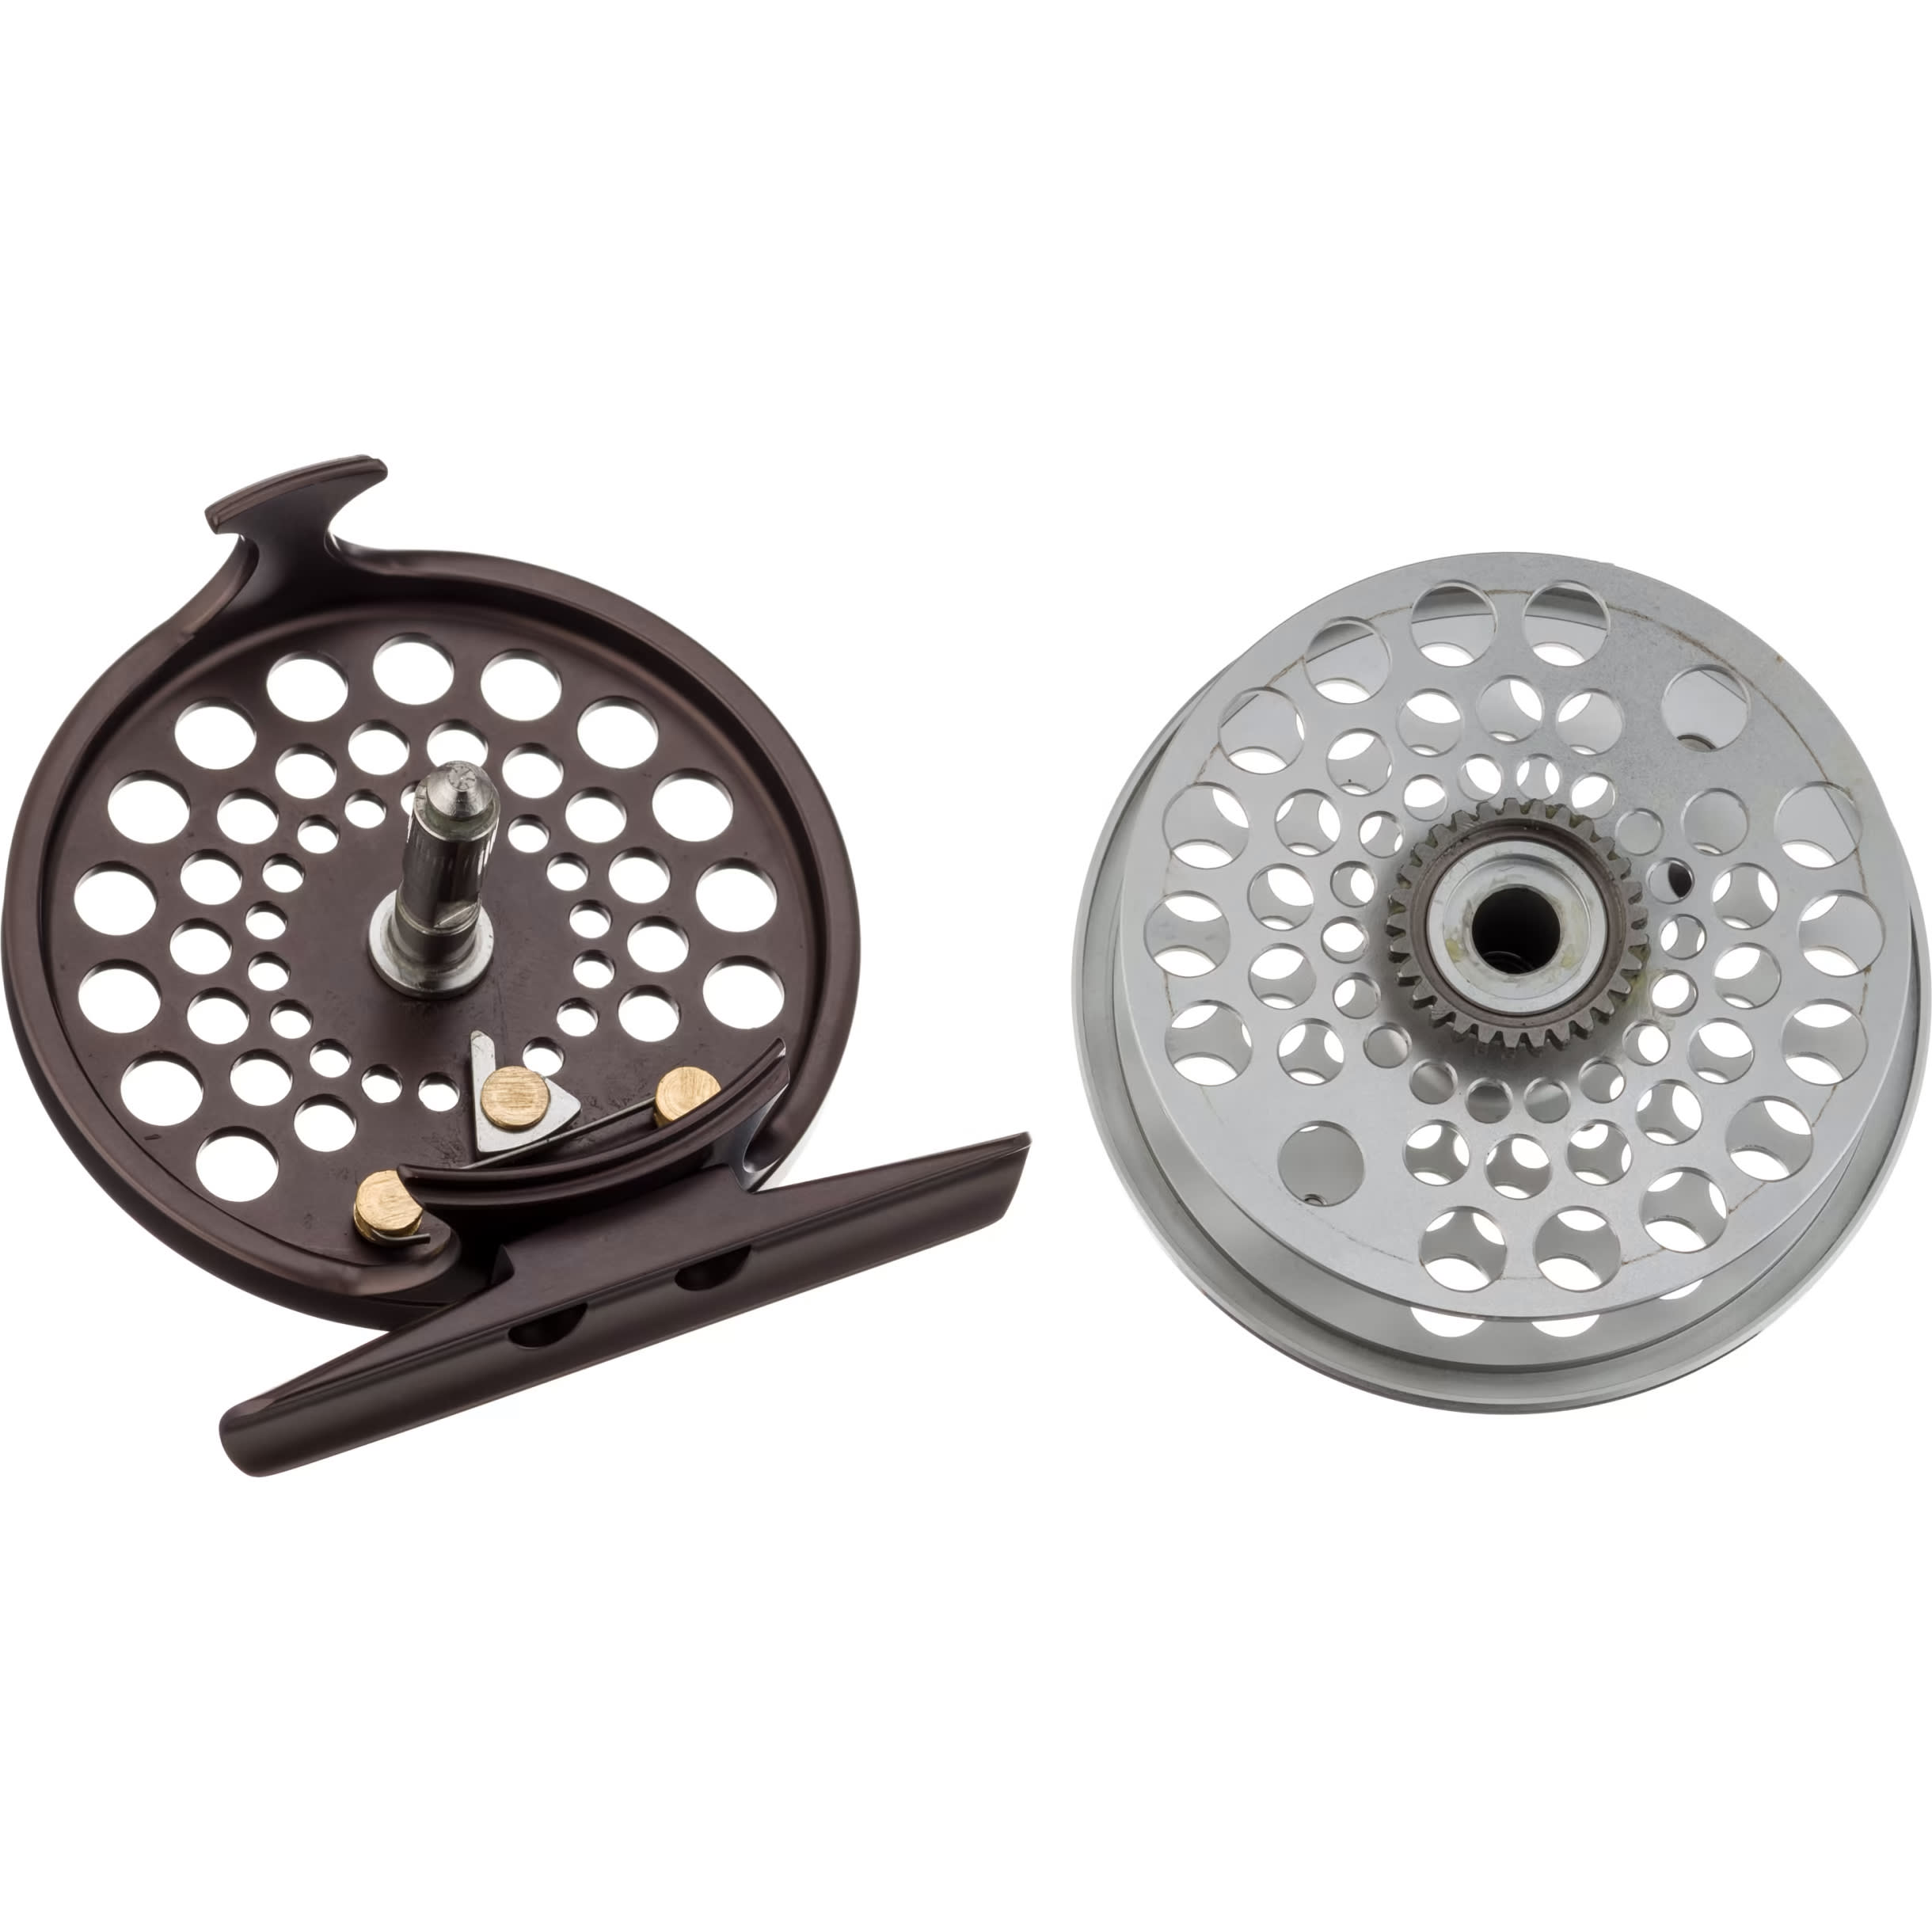 White River Fly Shop Kingfisher Fly Reel KFBB8, 7/8